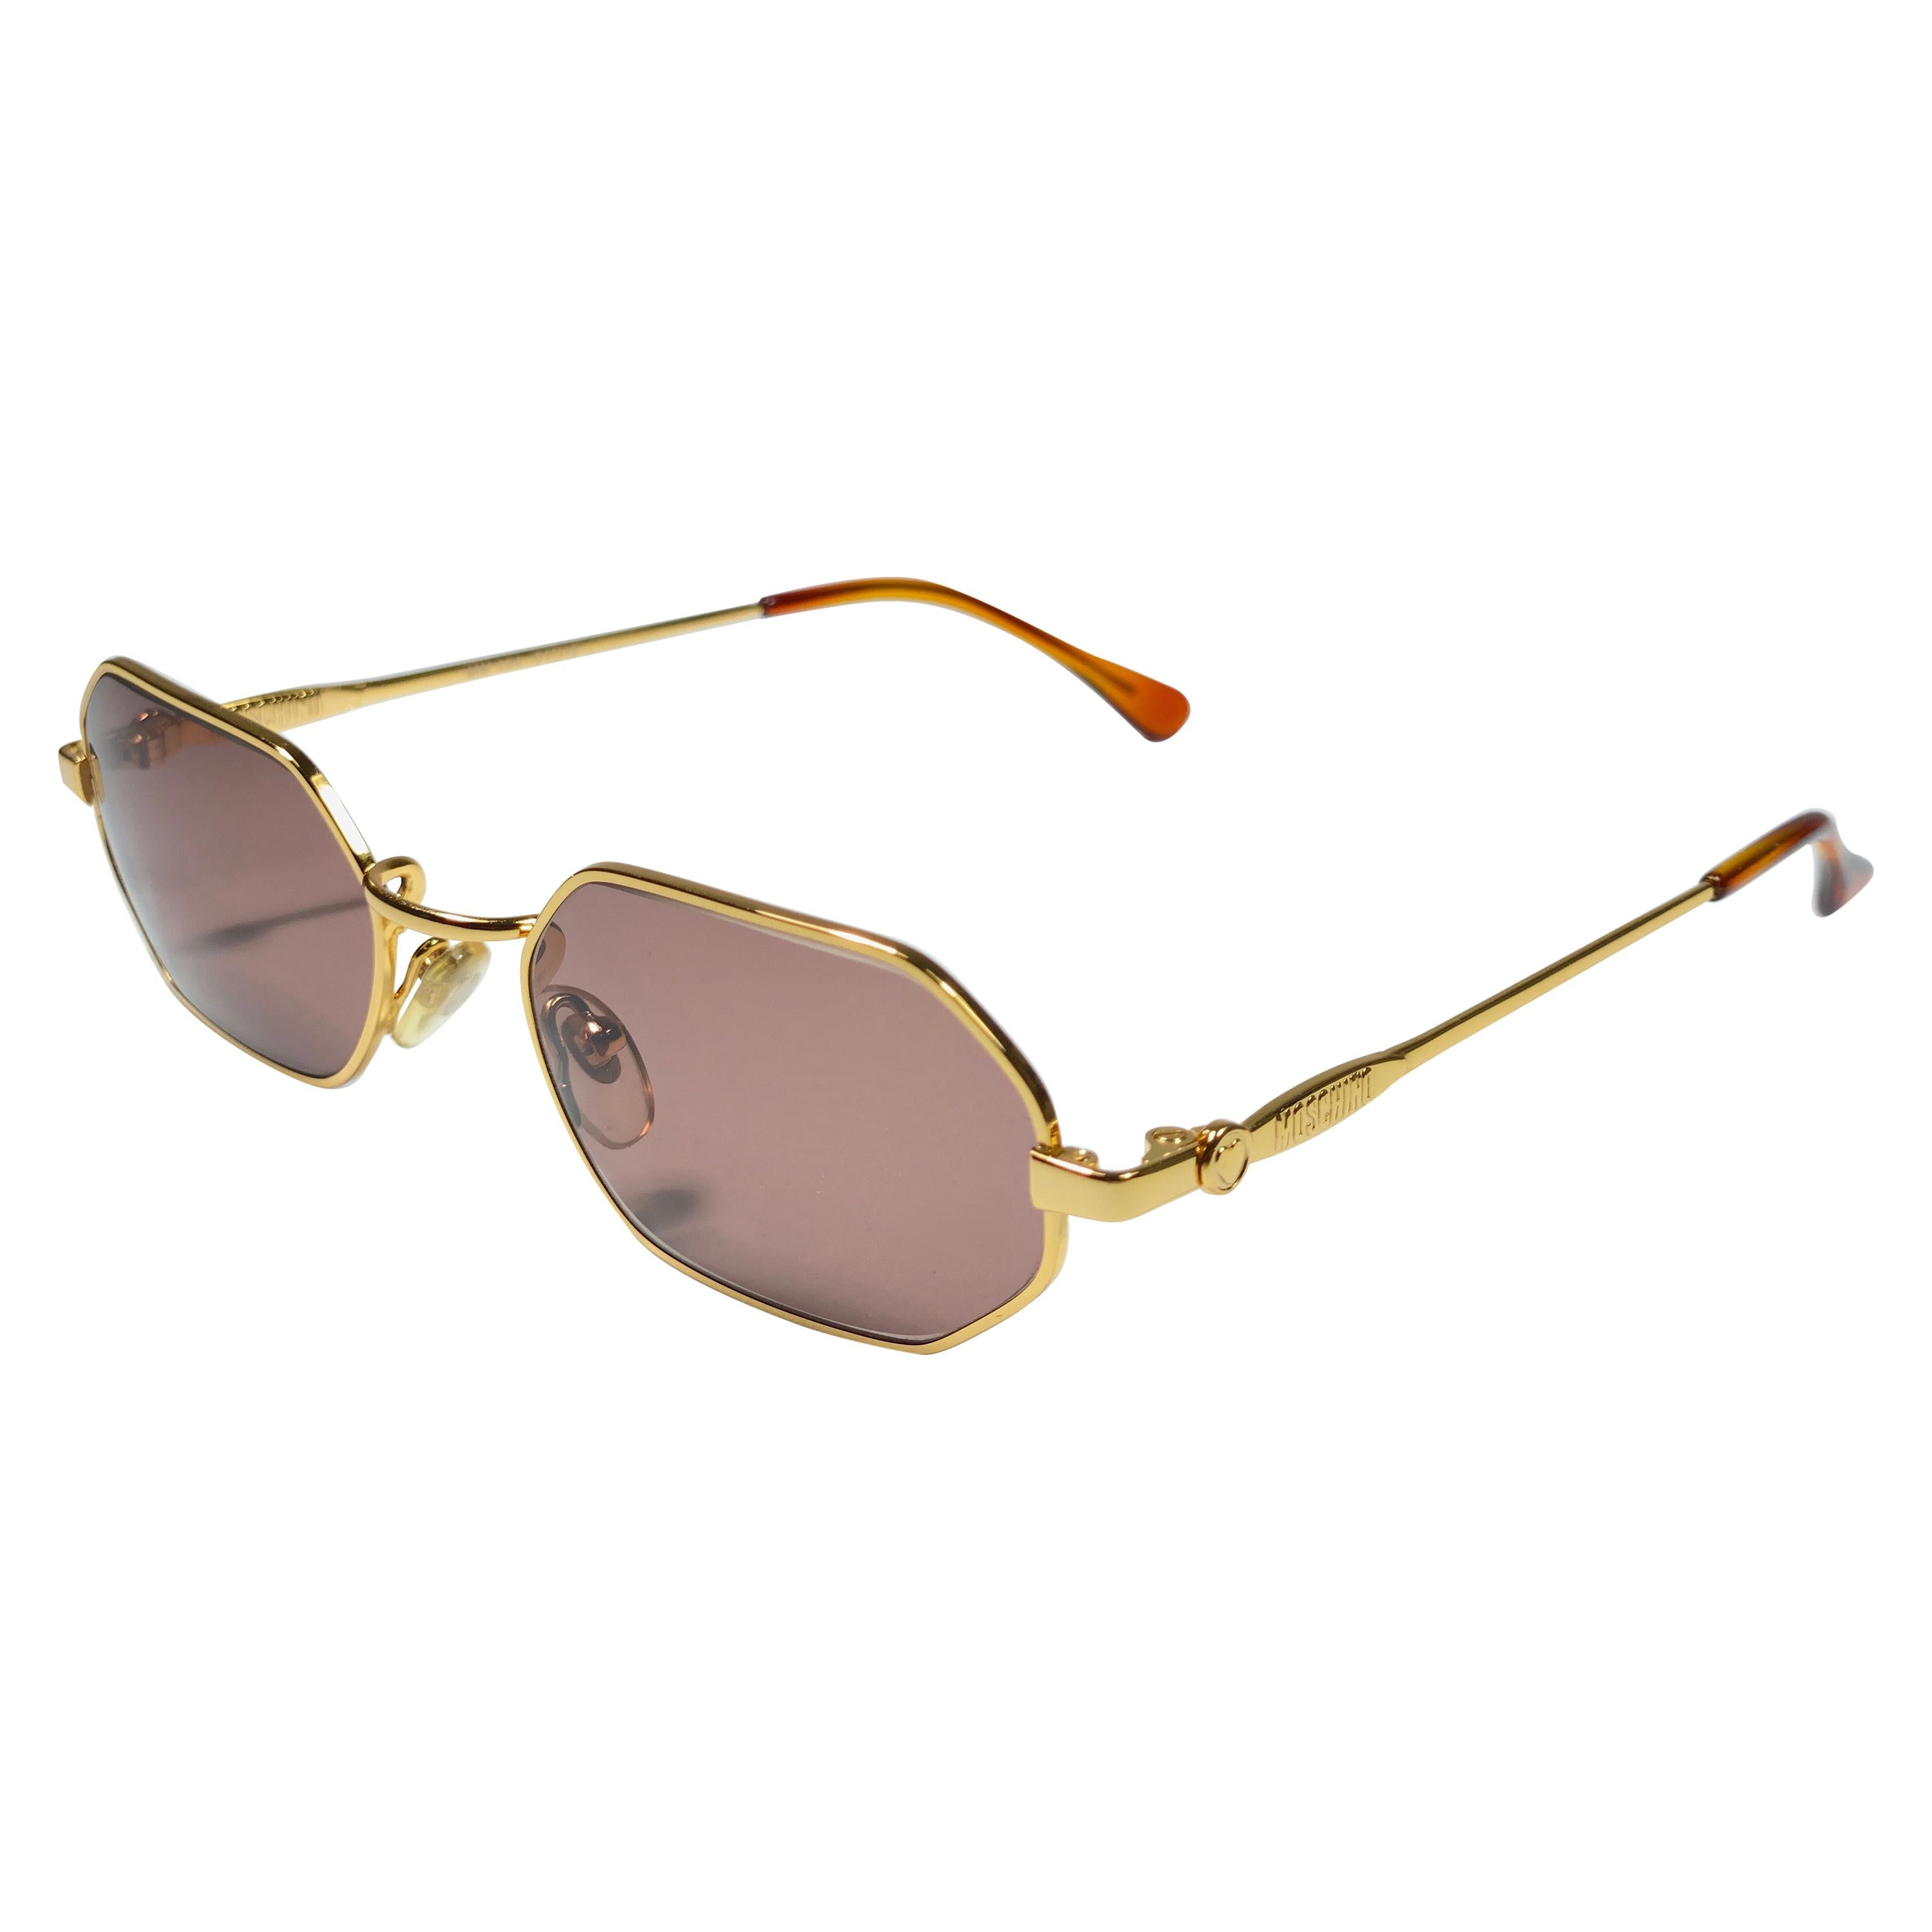 New Vintage Moschino MM134 Small Gold 1990 Sunglasses Made in Italy